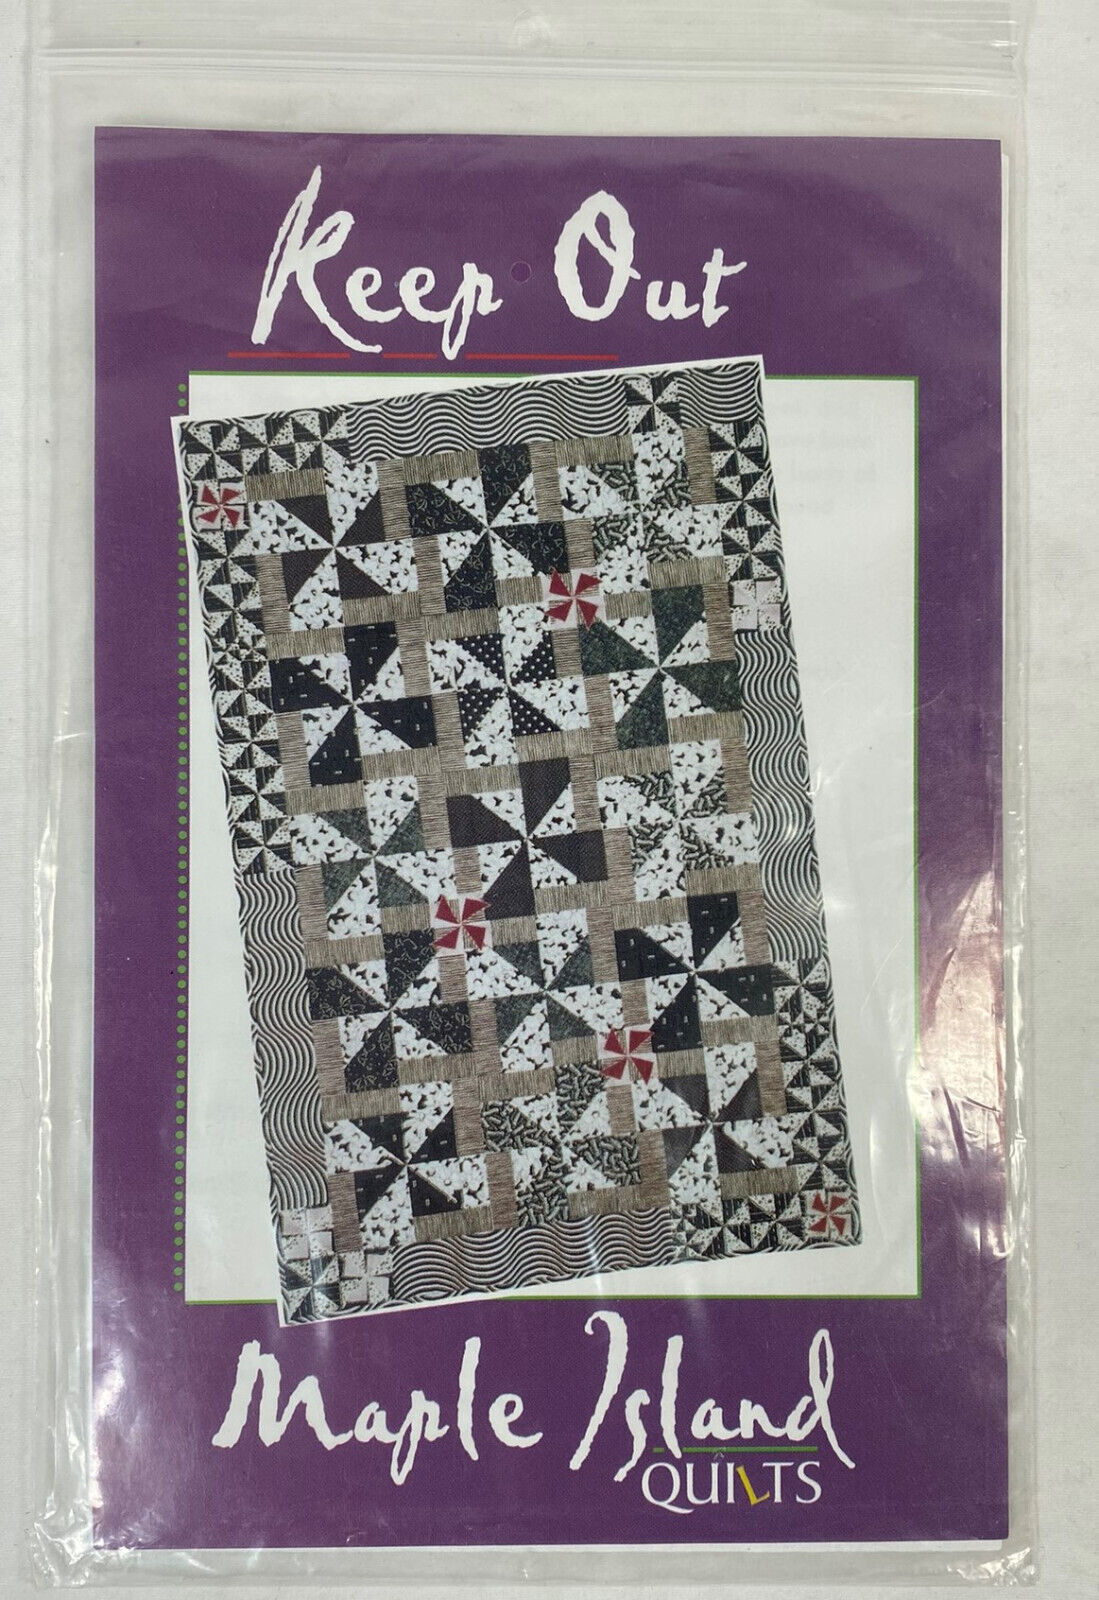 Quilt pattern: Maple Island Quilts - Keep Out 1998, New - $6.00